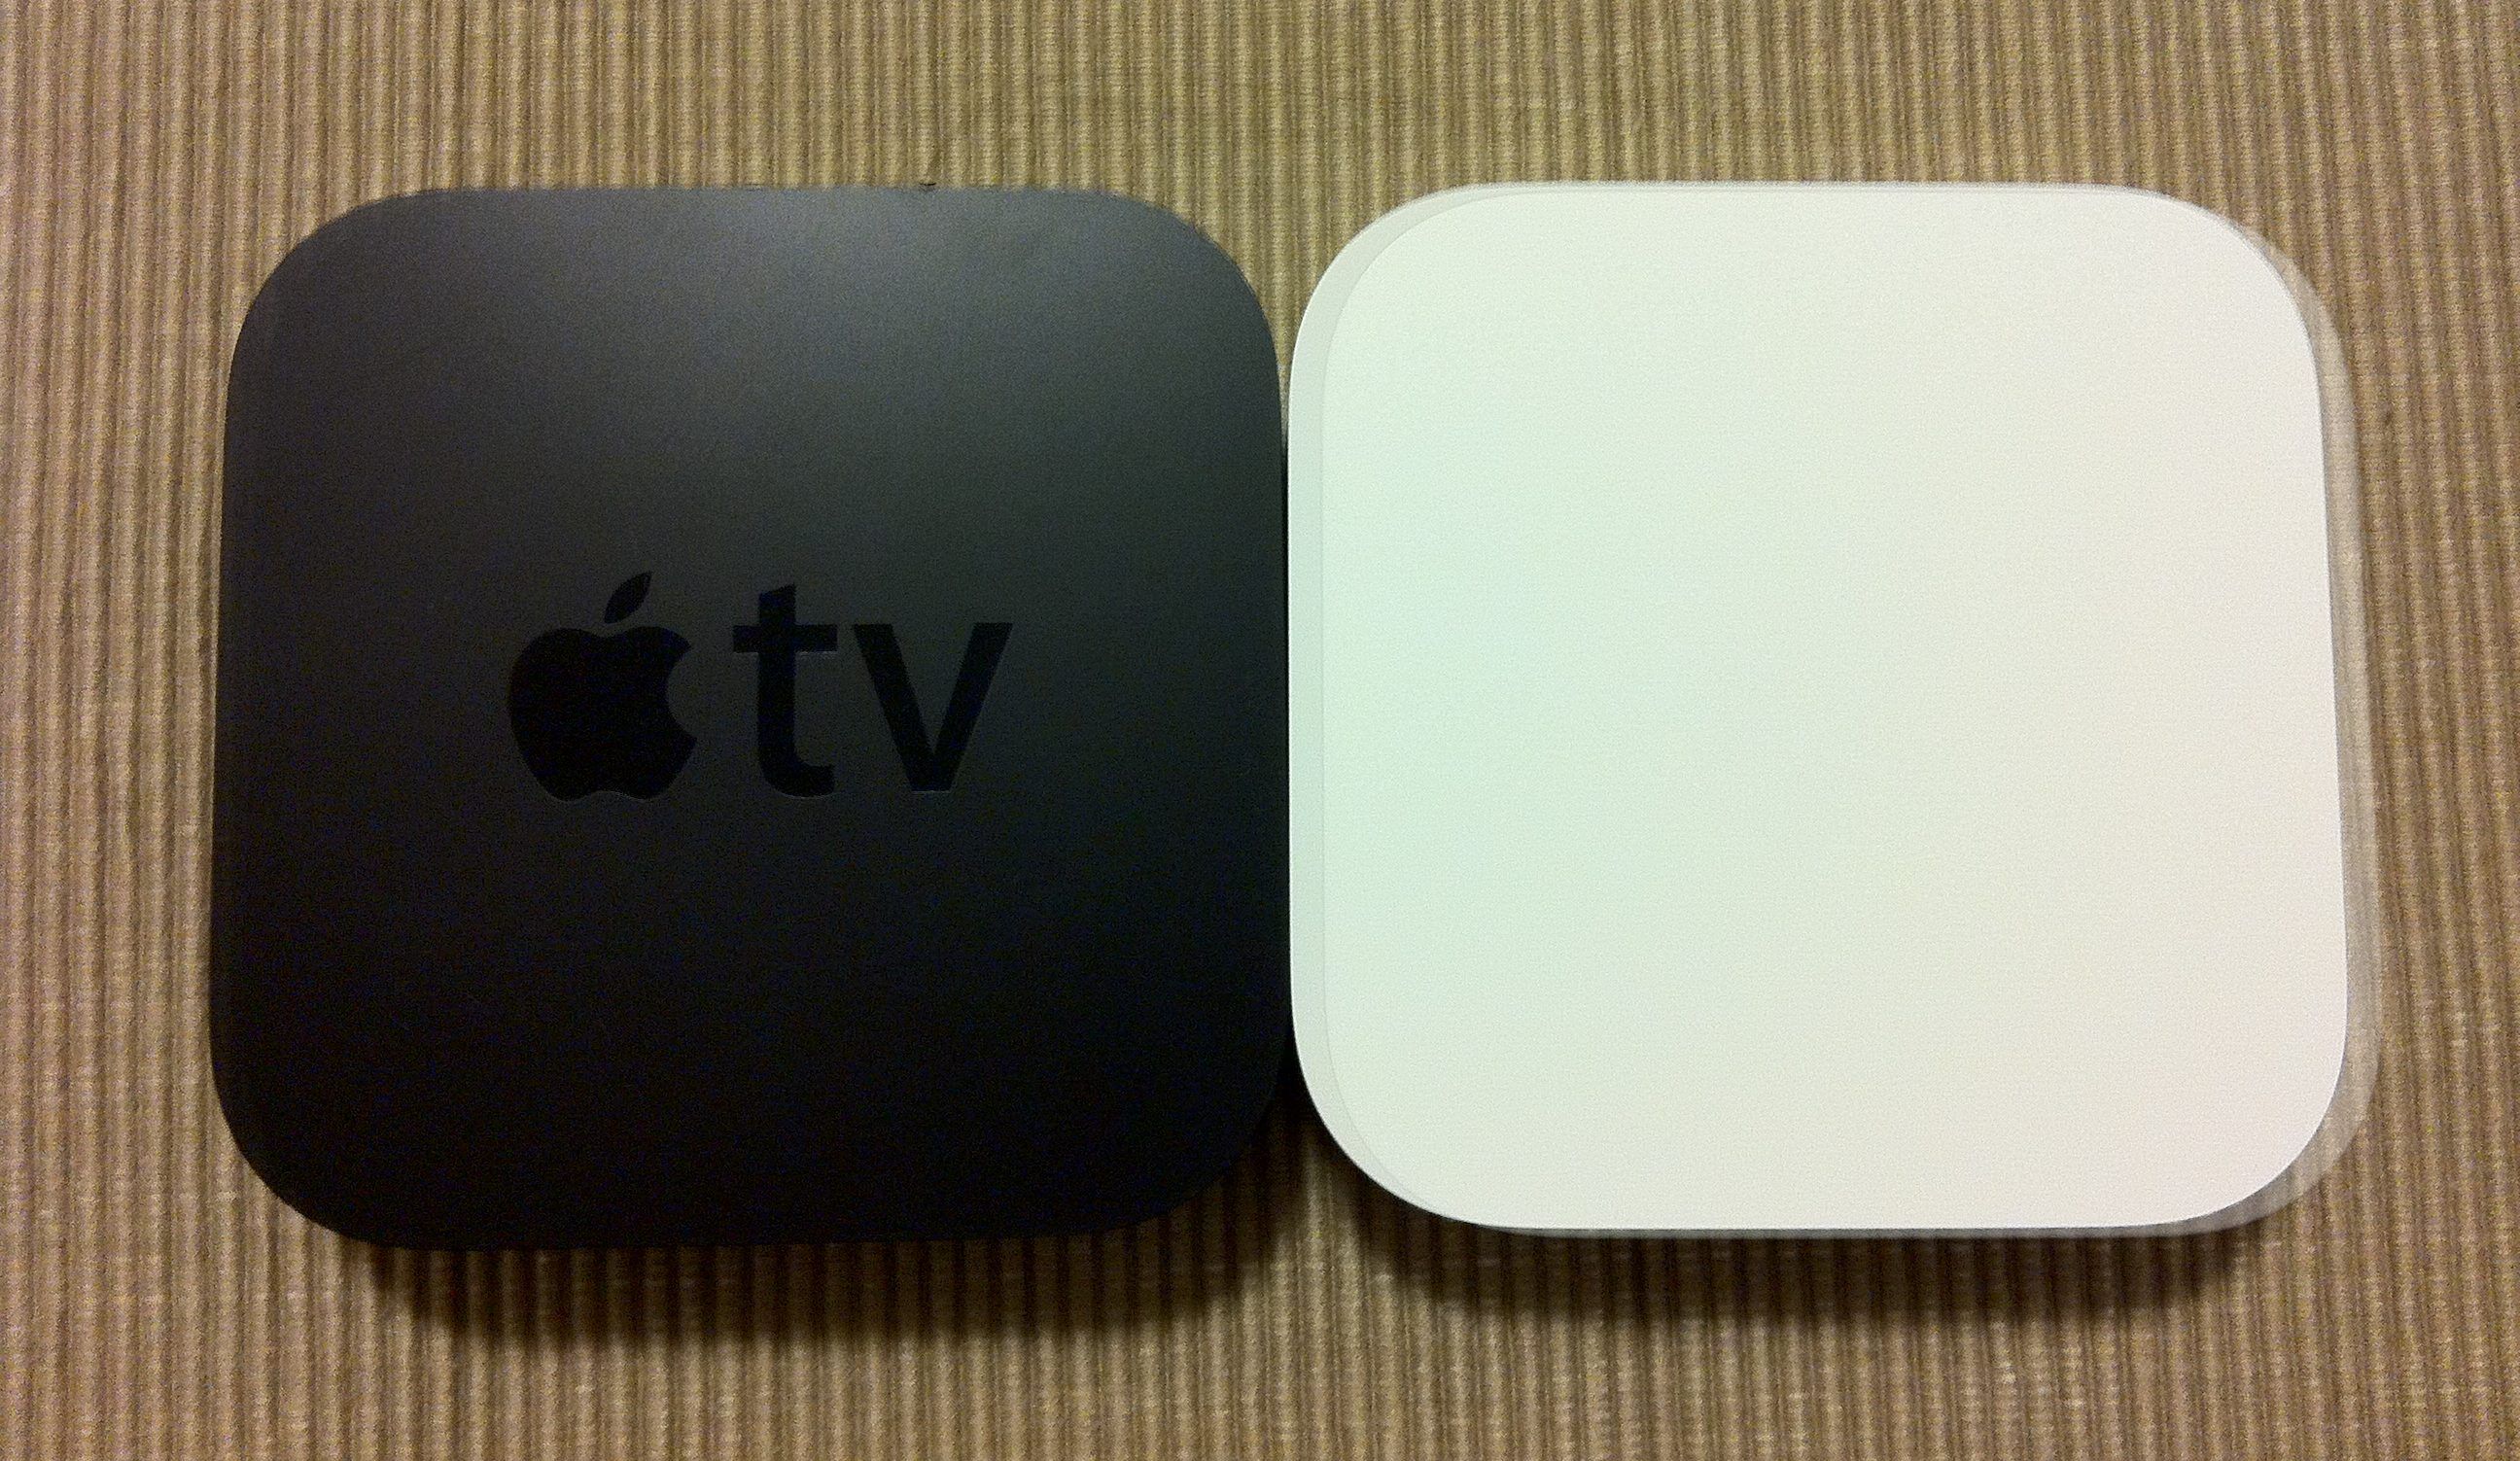 The square model of an AirPort Express router sits beside an Apple TV, showcasing their similarities